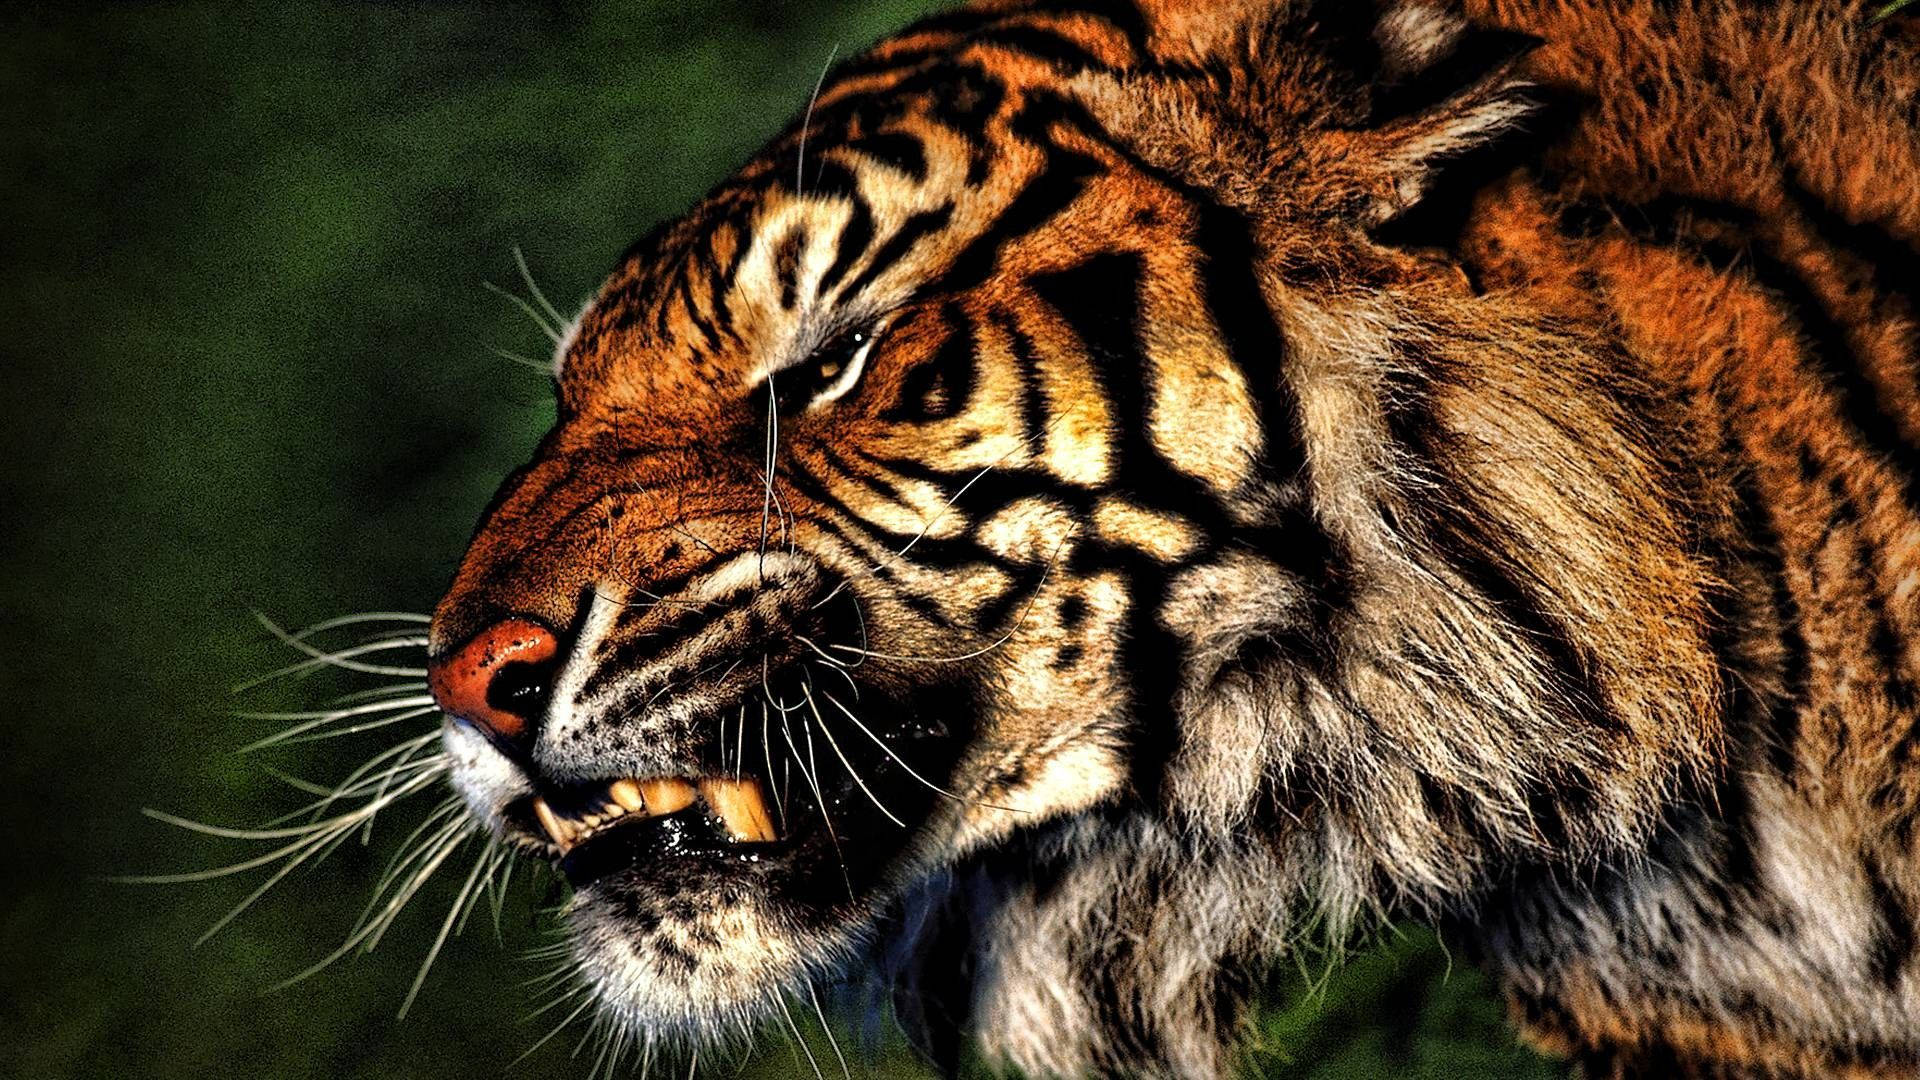 Angry Tiger Side View Portrait Wallpaper